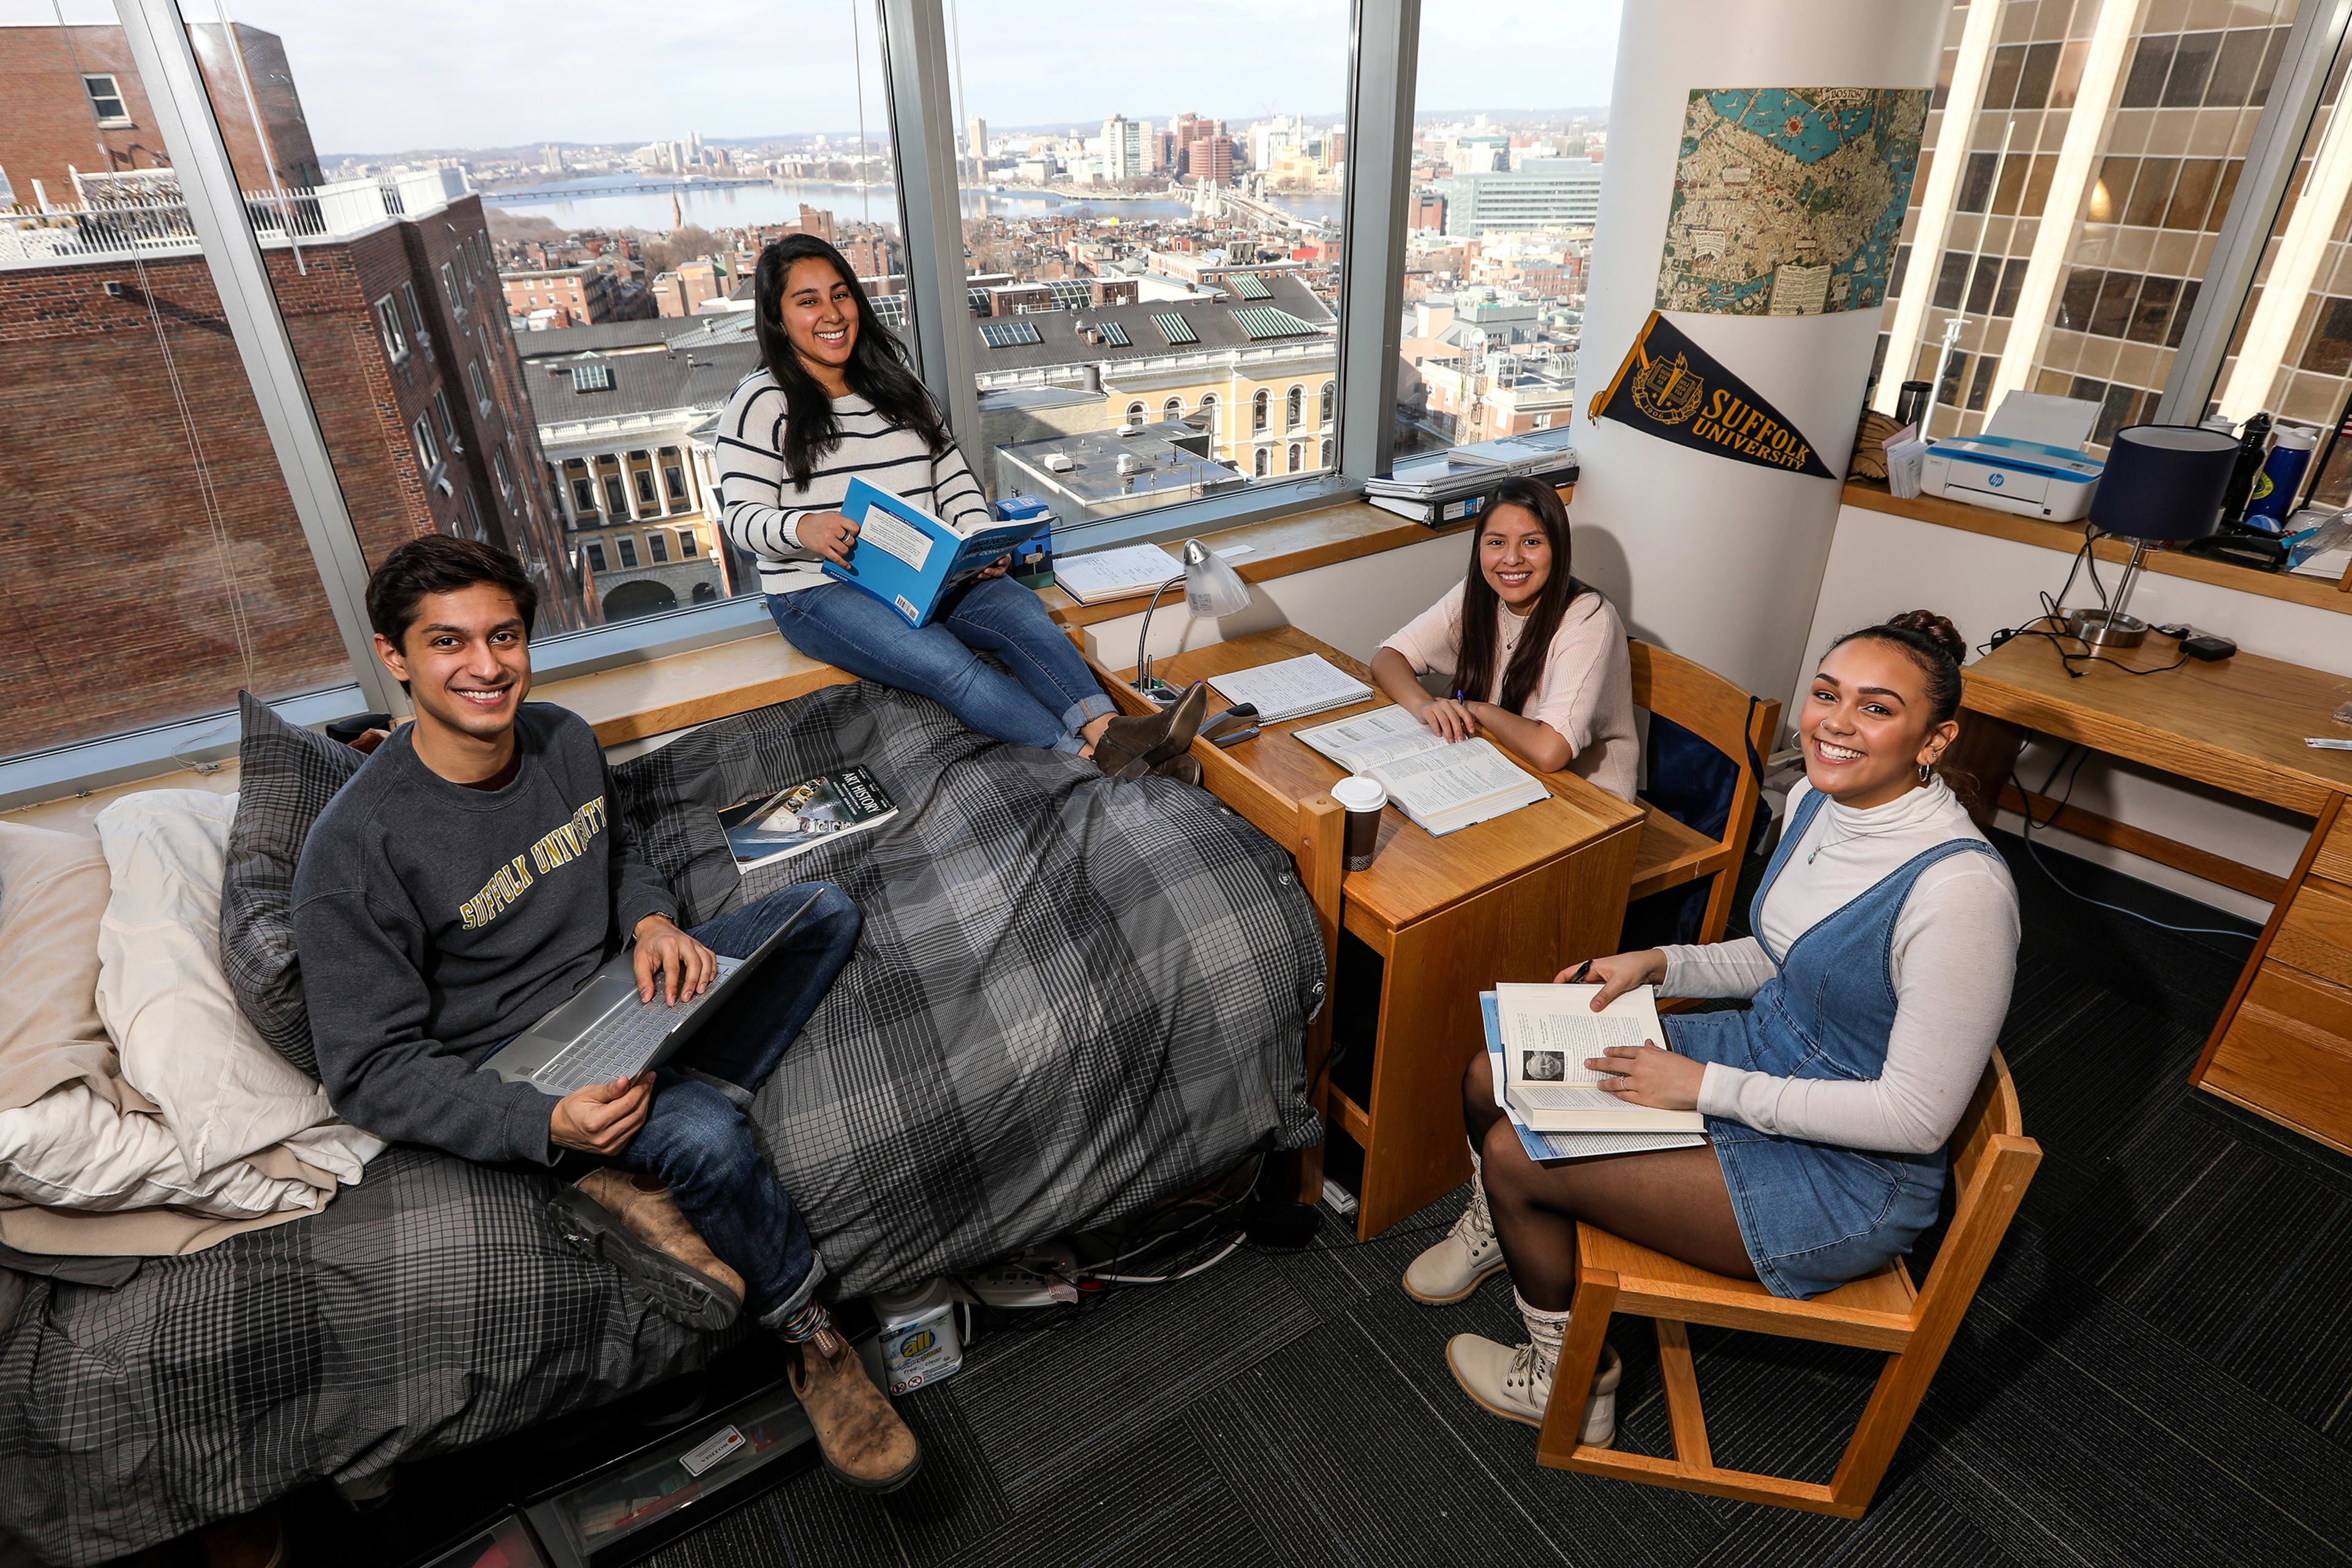 SLU students in residential hall studying